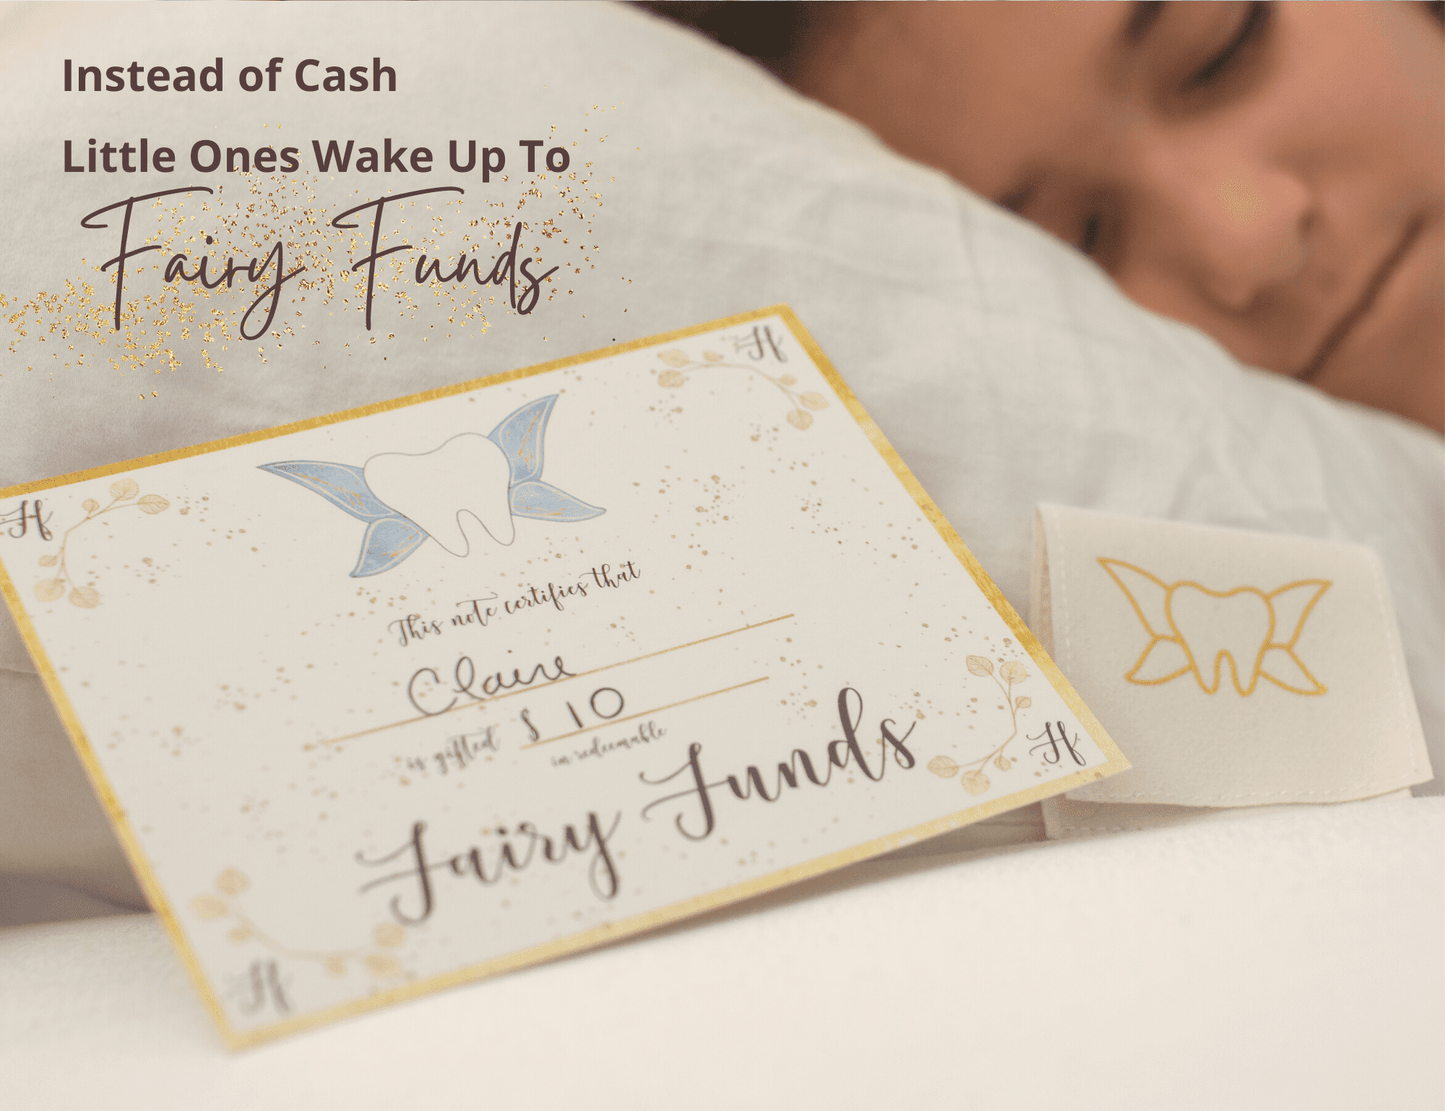 "Fairy Funds" Tooth Fairy Certificates - 20MomentsofTooth